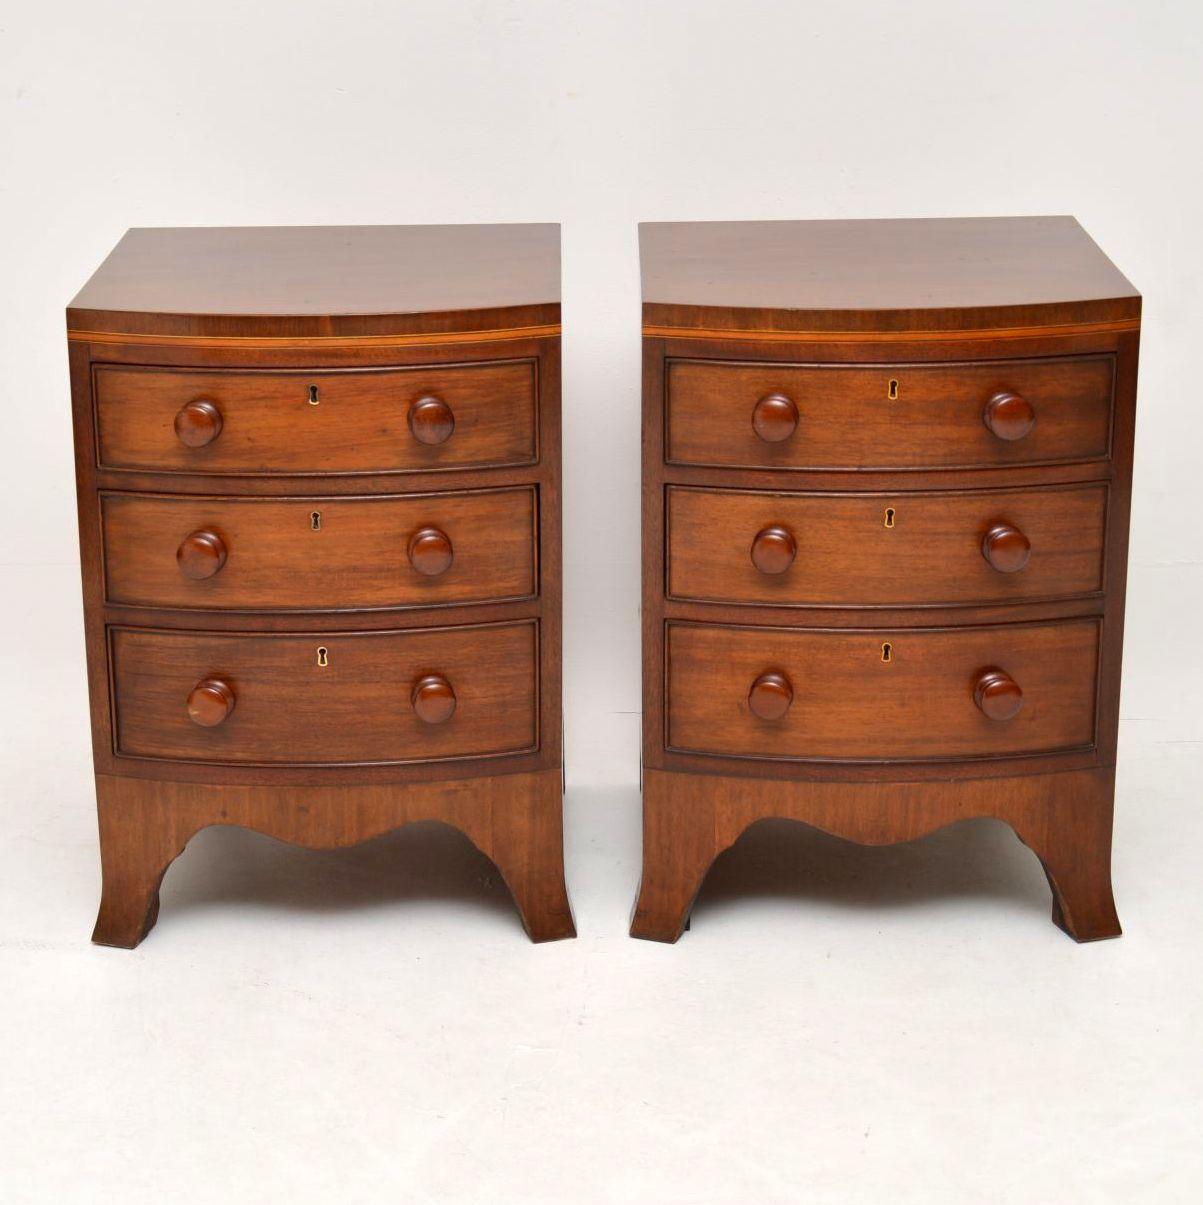 Pair of antique Georgian style mahogany bedside chests in wonderful condition and of extremely high quality. They are bow fronted, with three drawers on each and sit on pronounced splayed feet with apron bases. These bedside chests have been